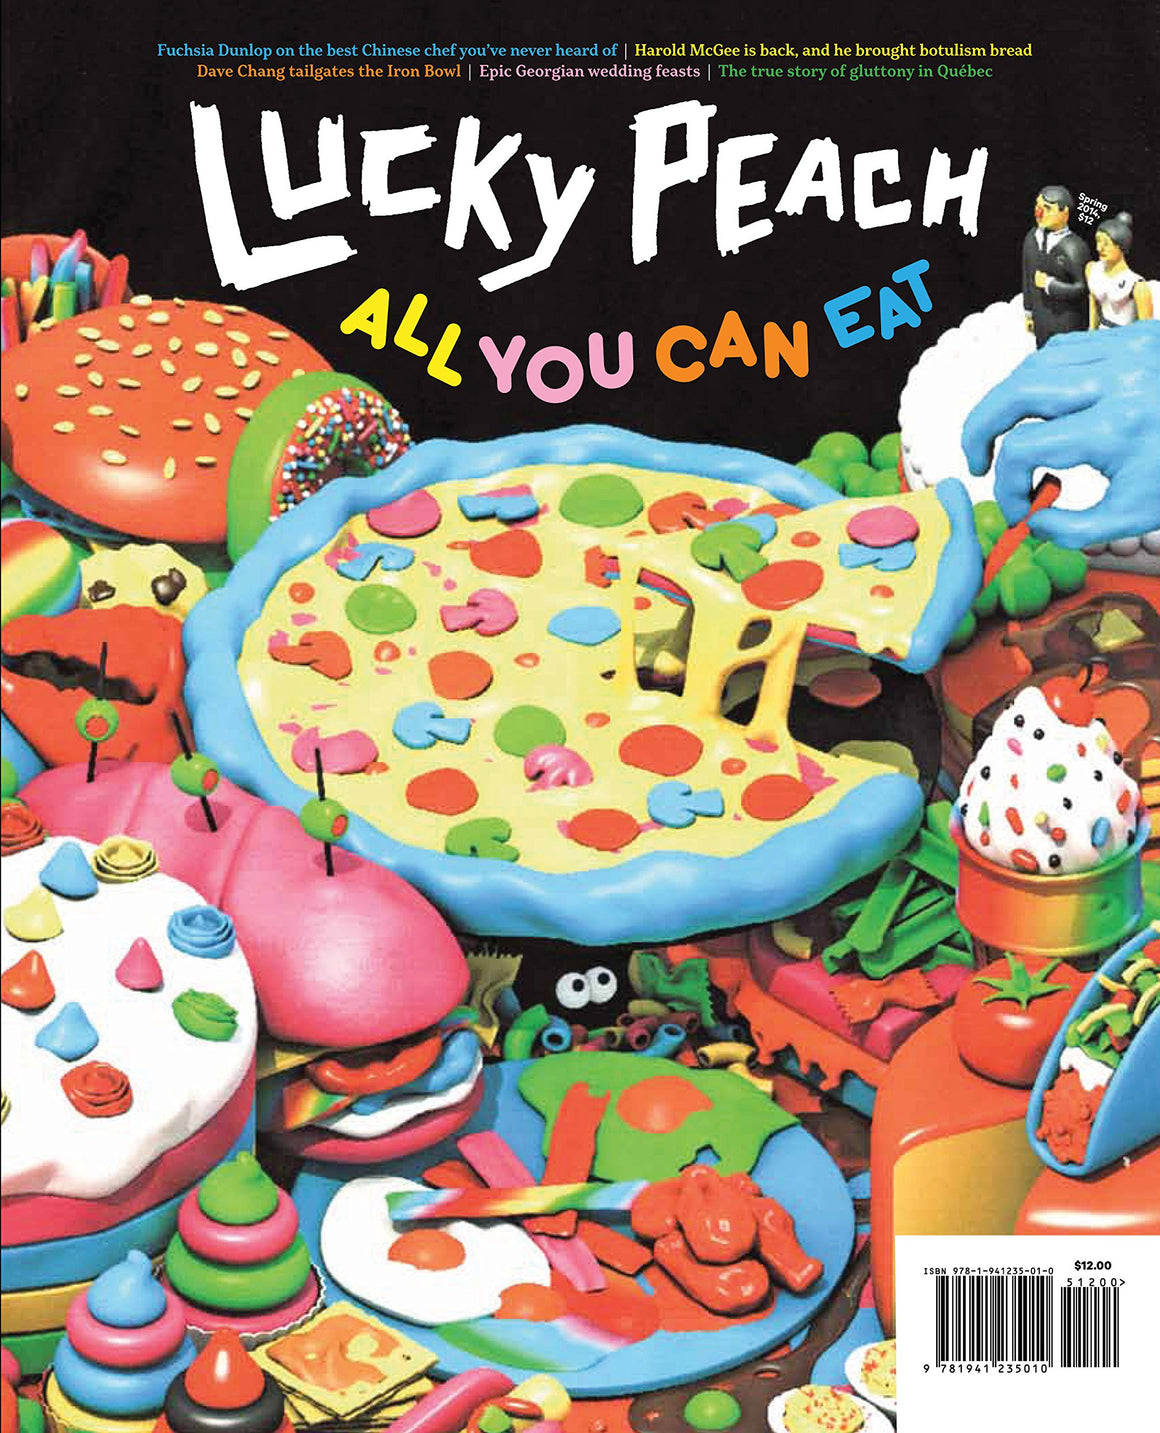 (Magazine) Lucky Peach. Issue 11. The All You Can Eat Issue.